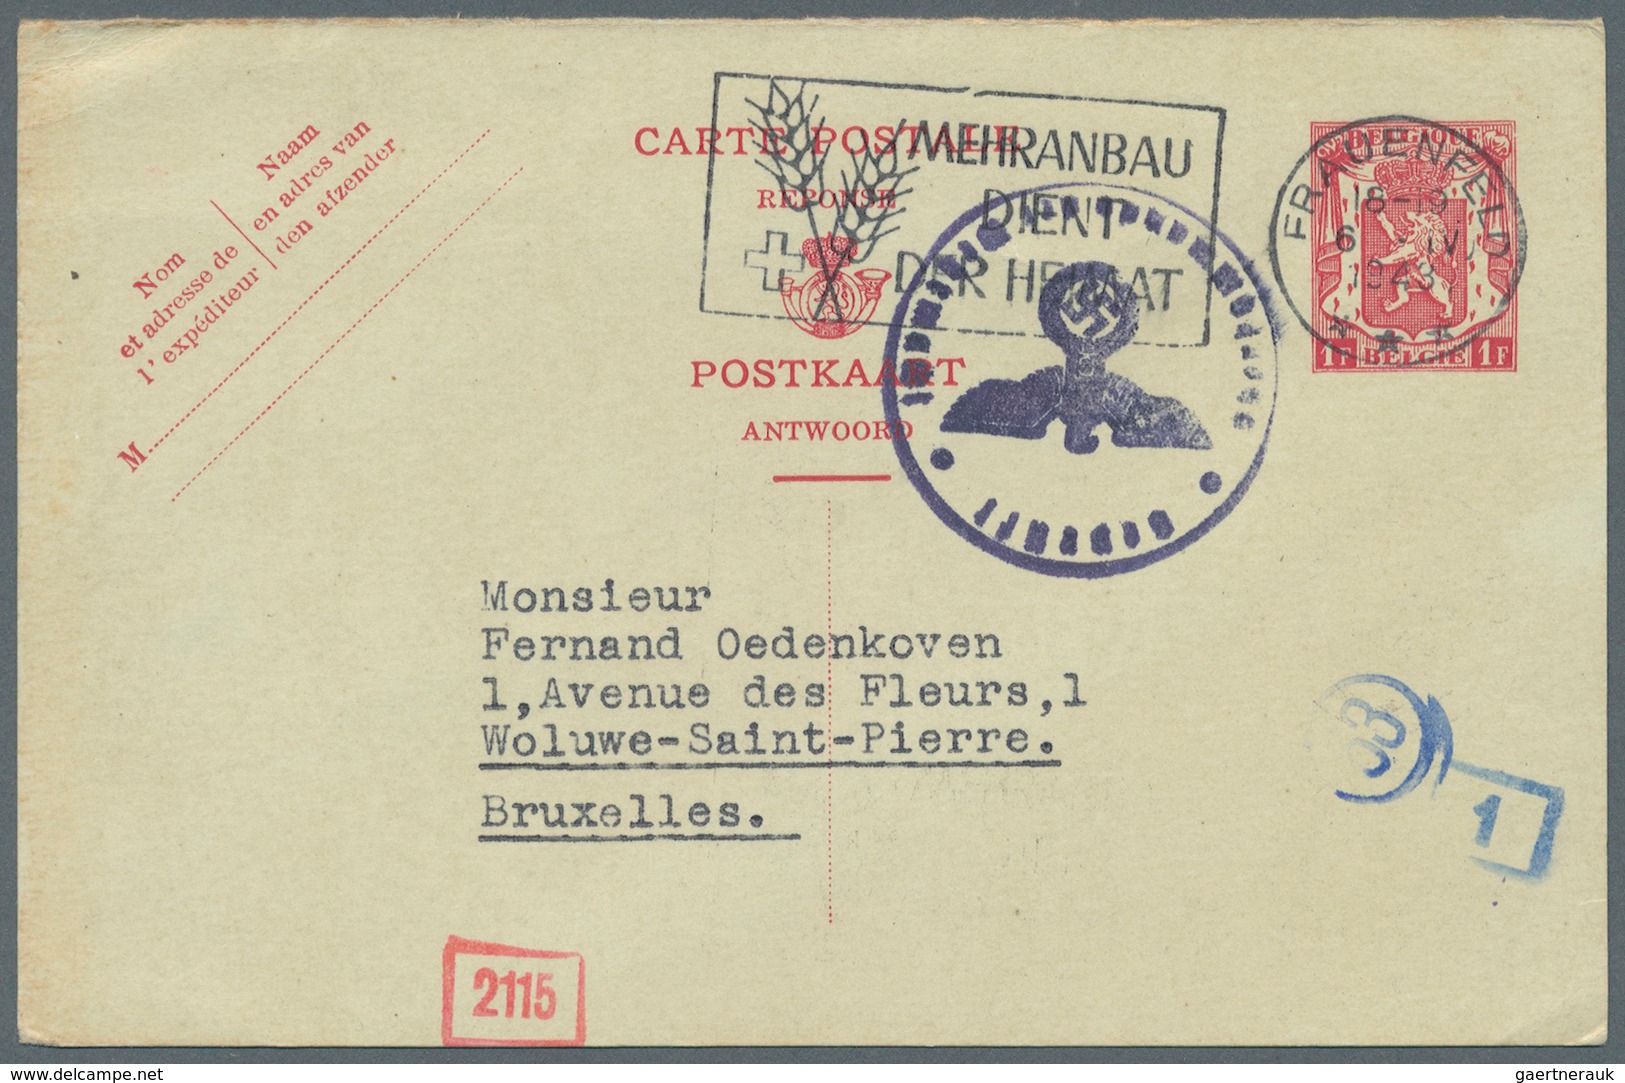 BENELUX: 1823/1943, group of seven better entires, e.g. four Belgien reply cards returned from Switz